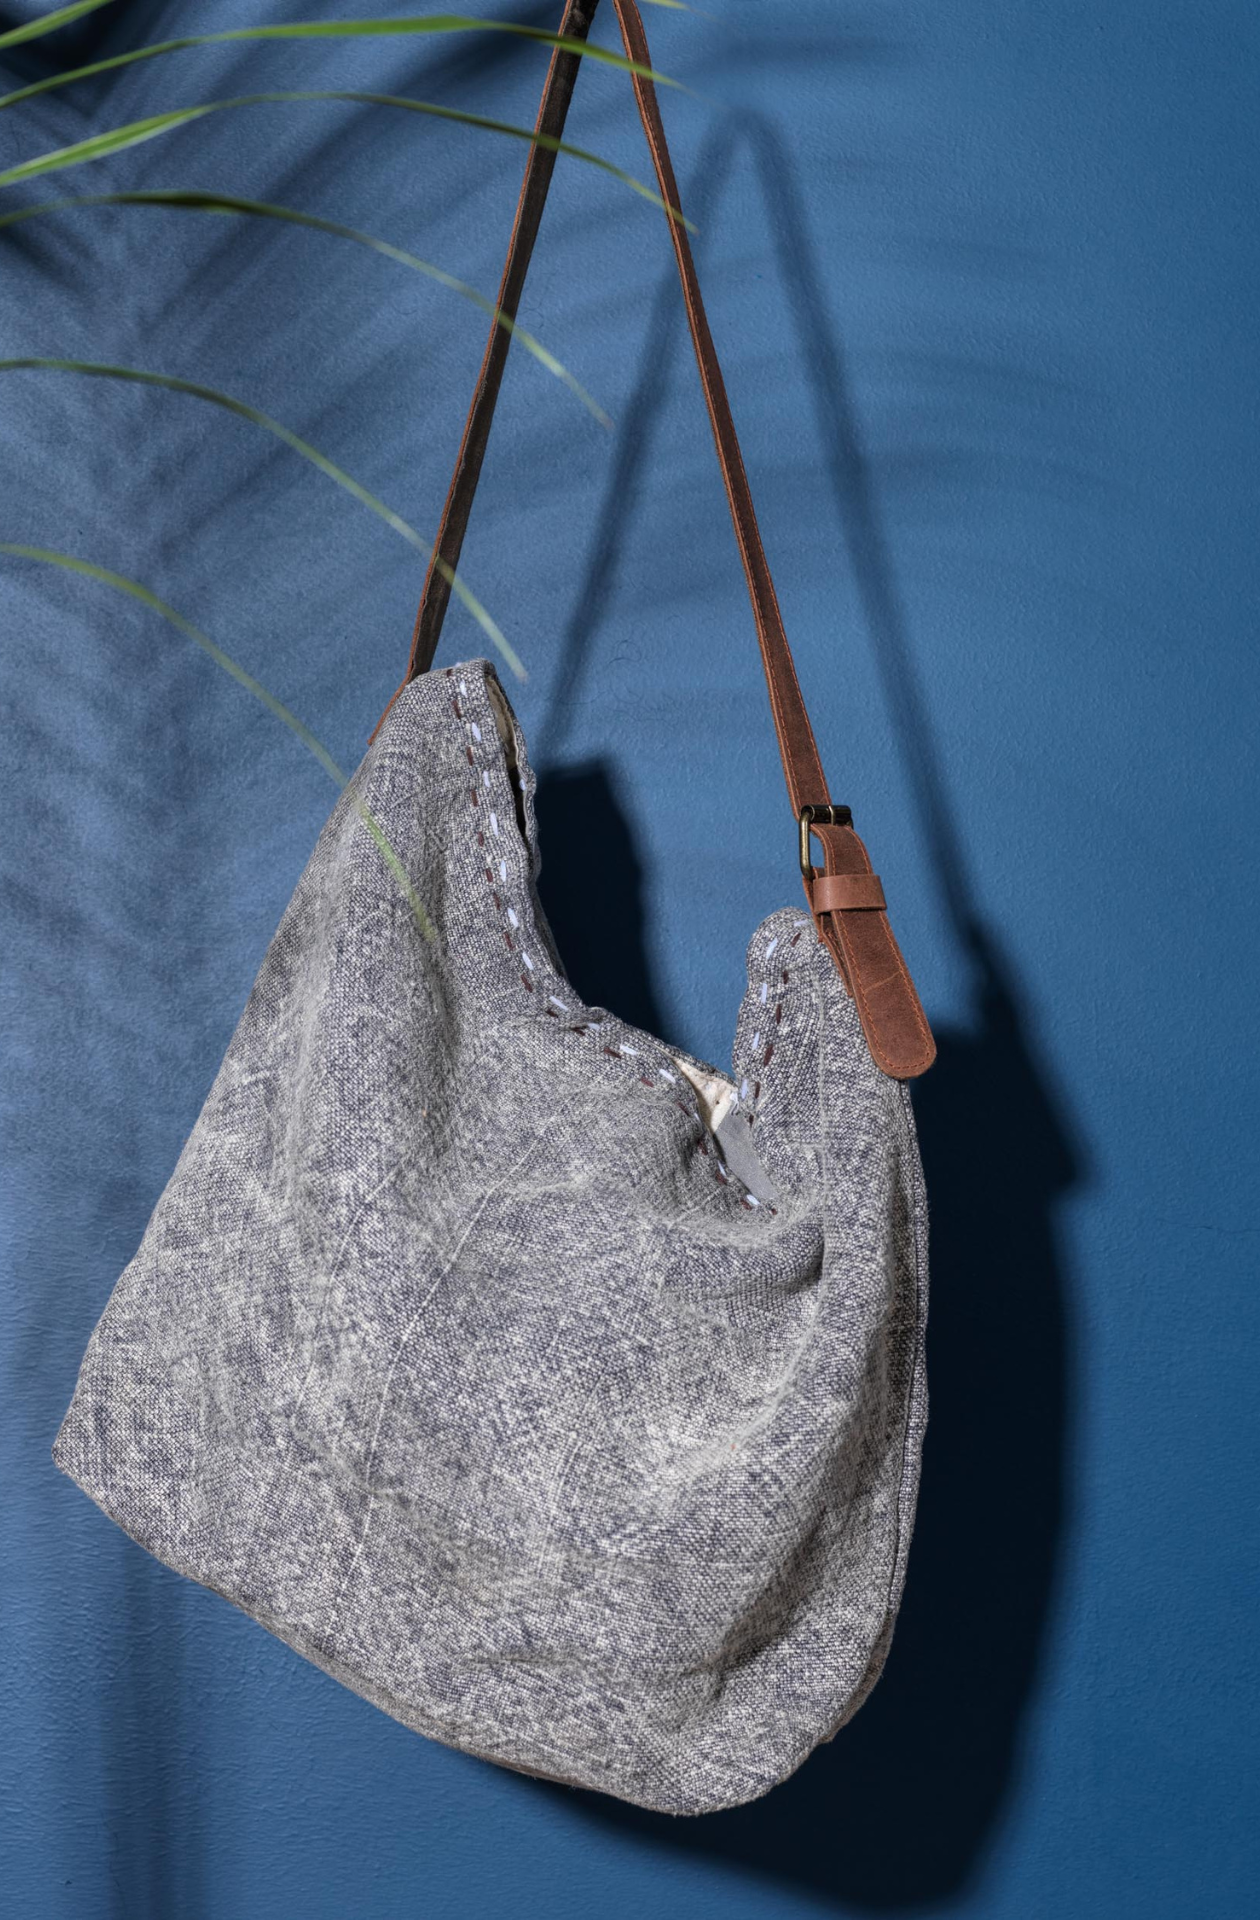 The smoke variant of the jute bag hanging from out of frame against a blue backround next to a green leafy plant.